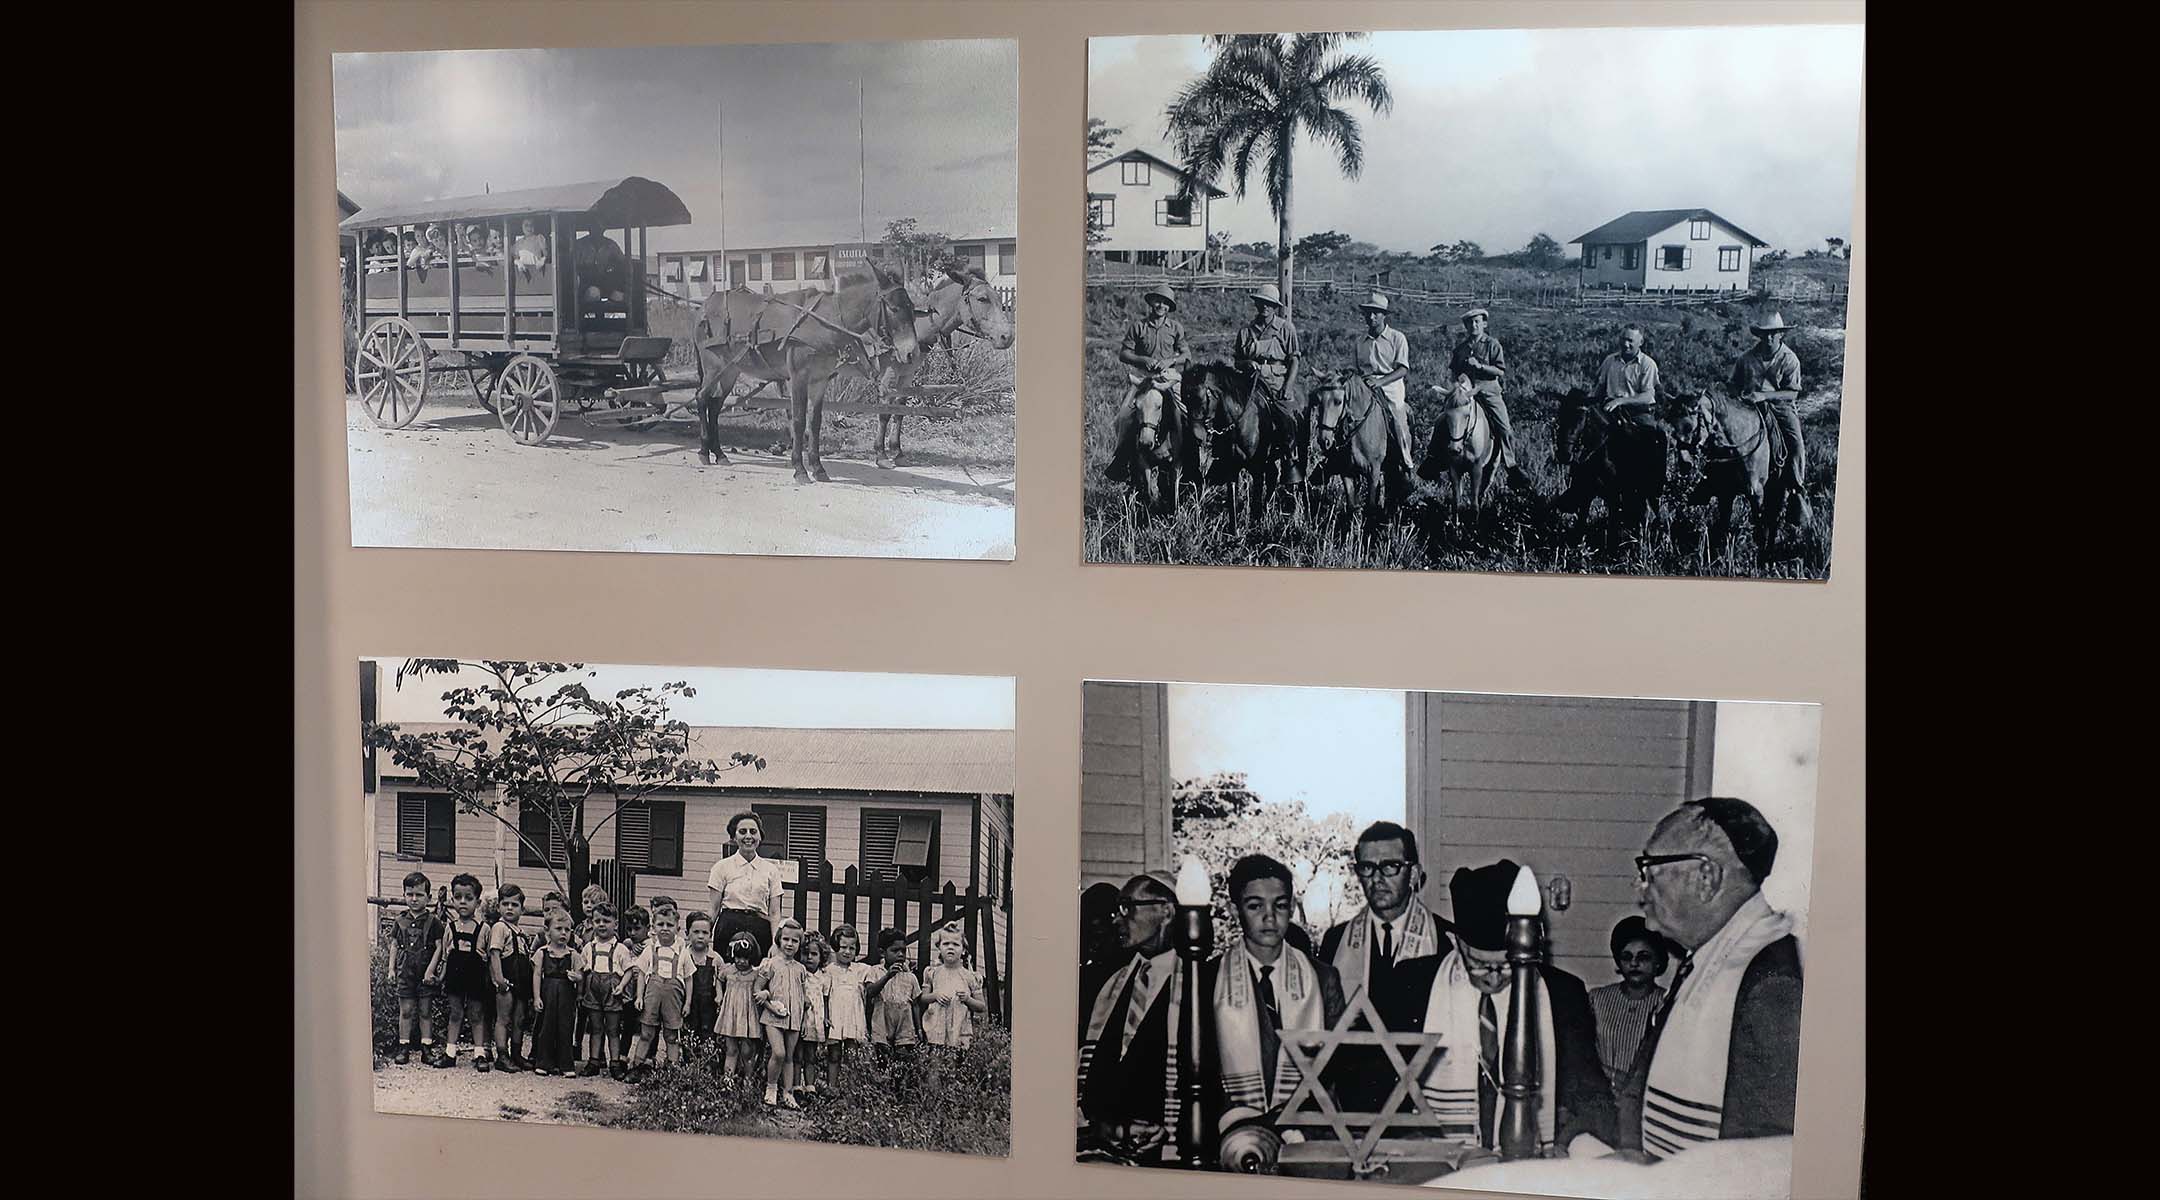 Photos of some of the 750 Jewish refugees who settled in Sosua in the 1940s.